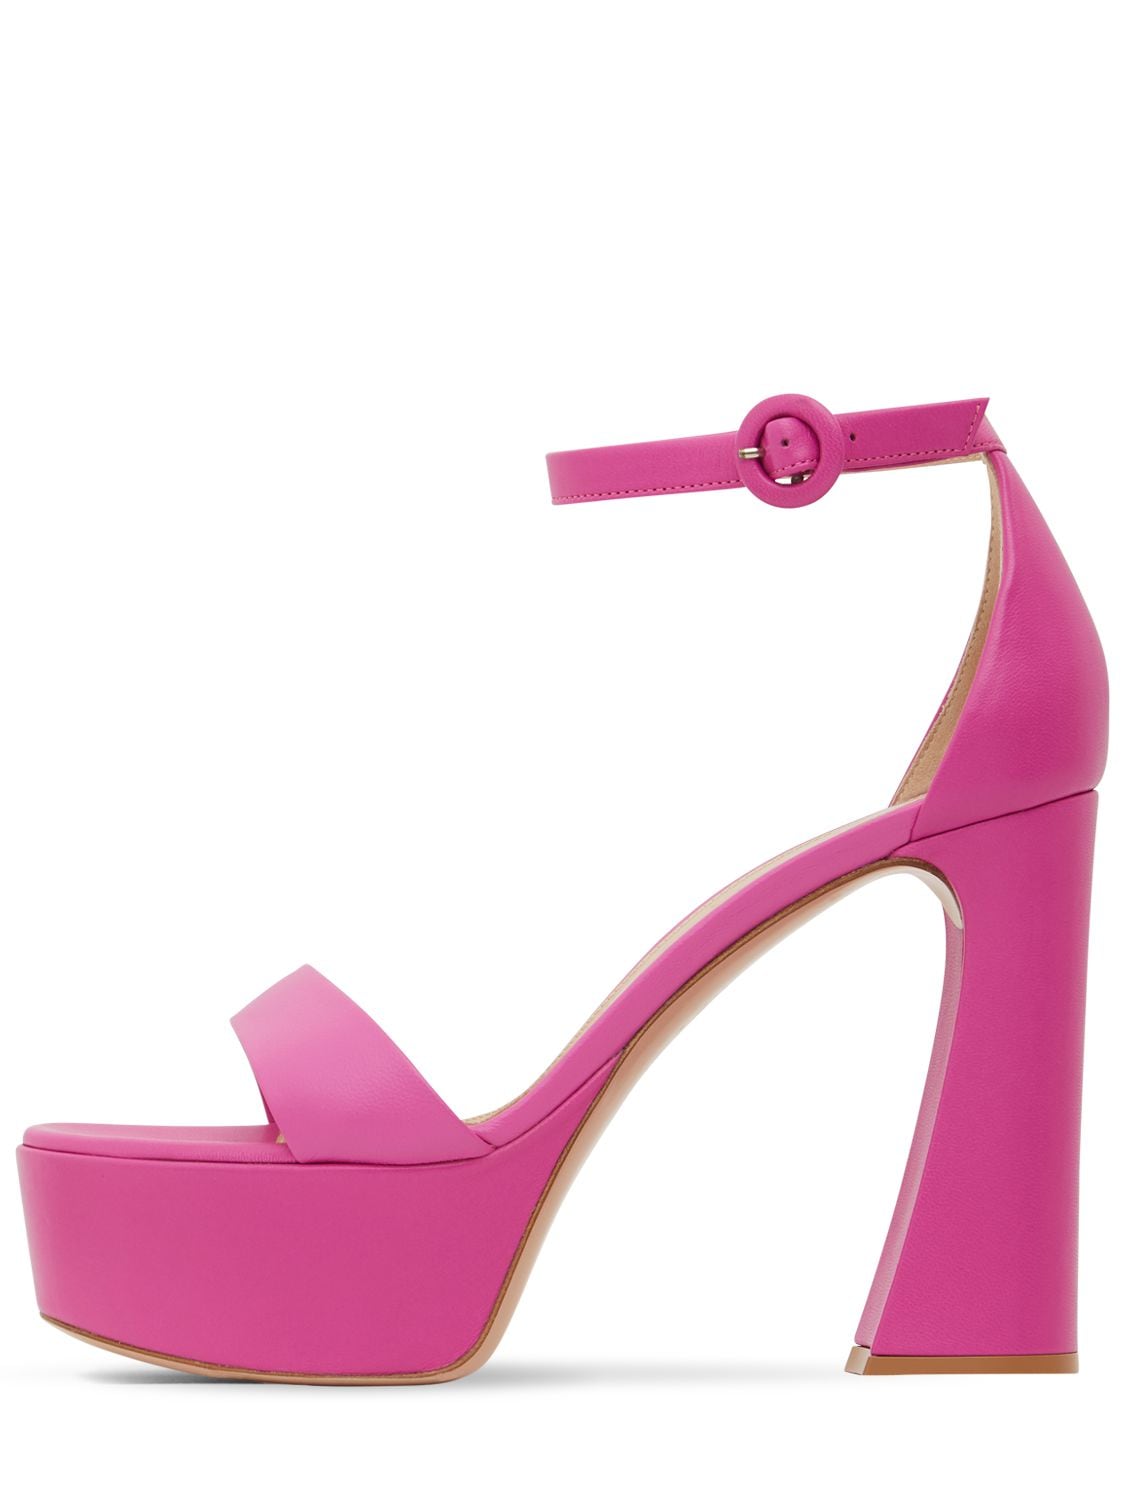 Gianvito Rossi 105mm Holly Leather High Heel Sandals In Fuchsia